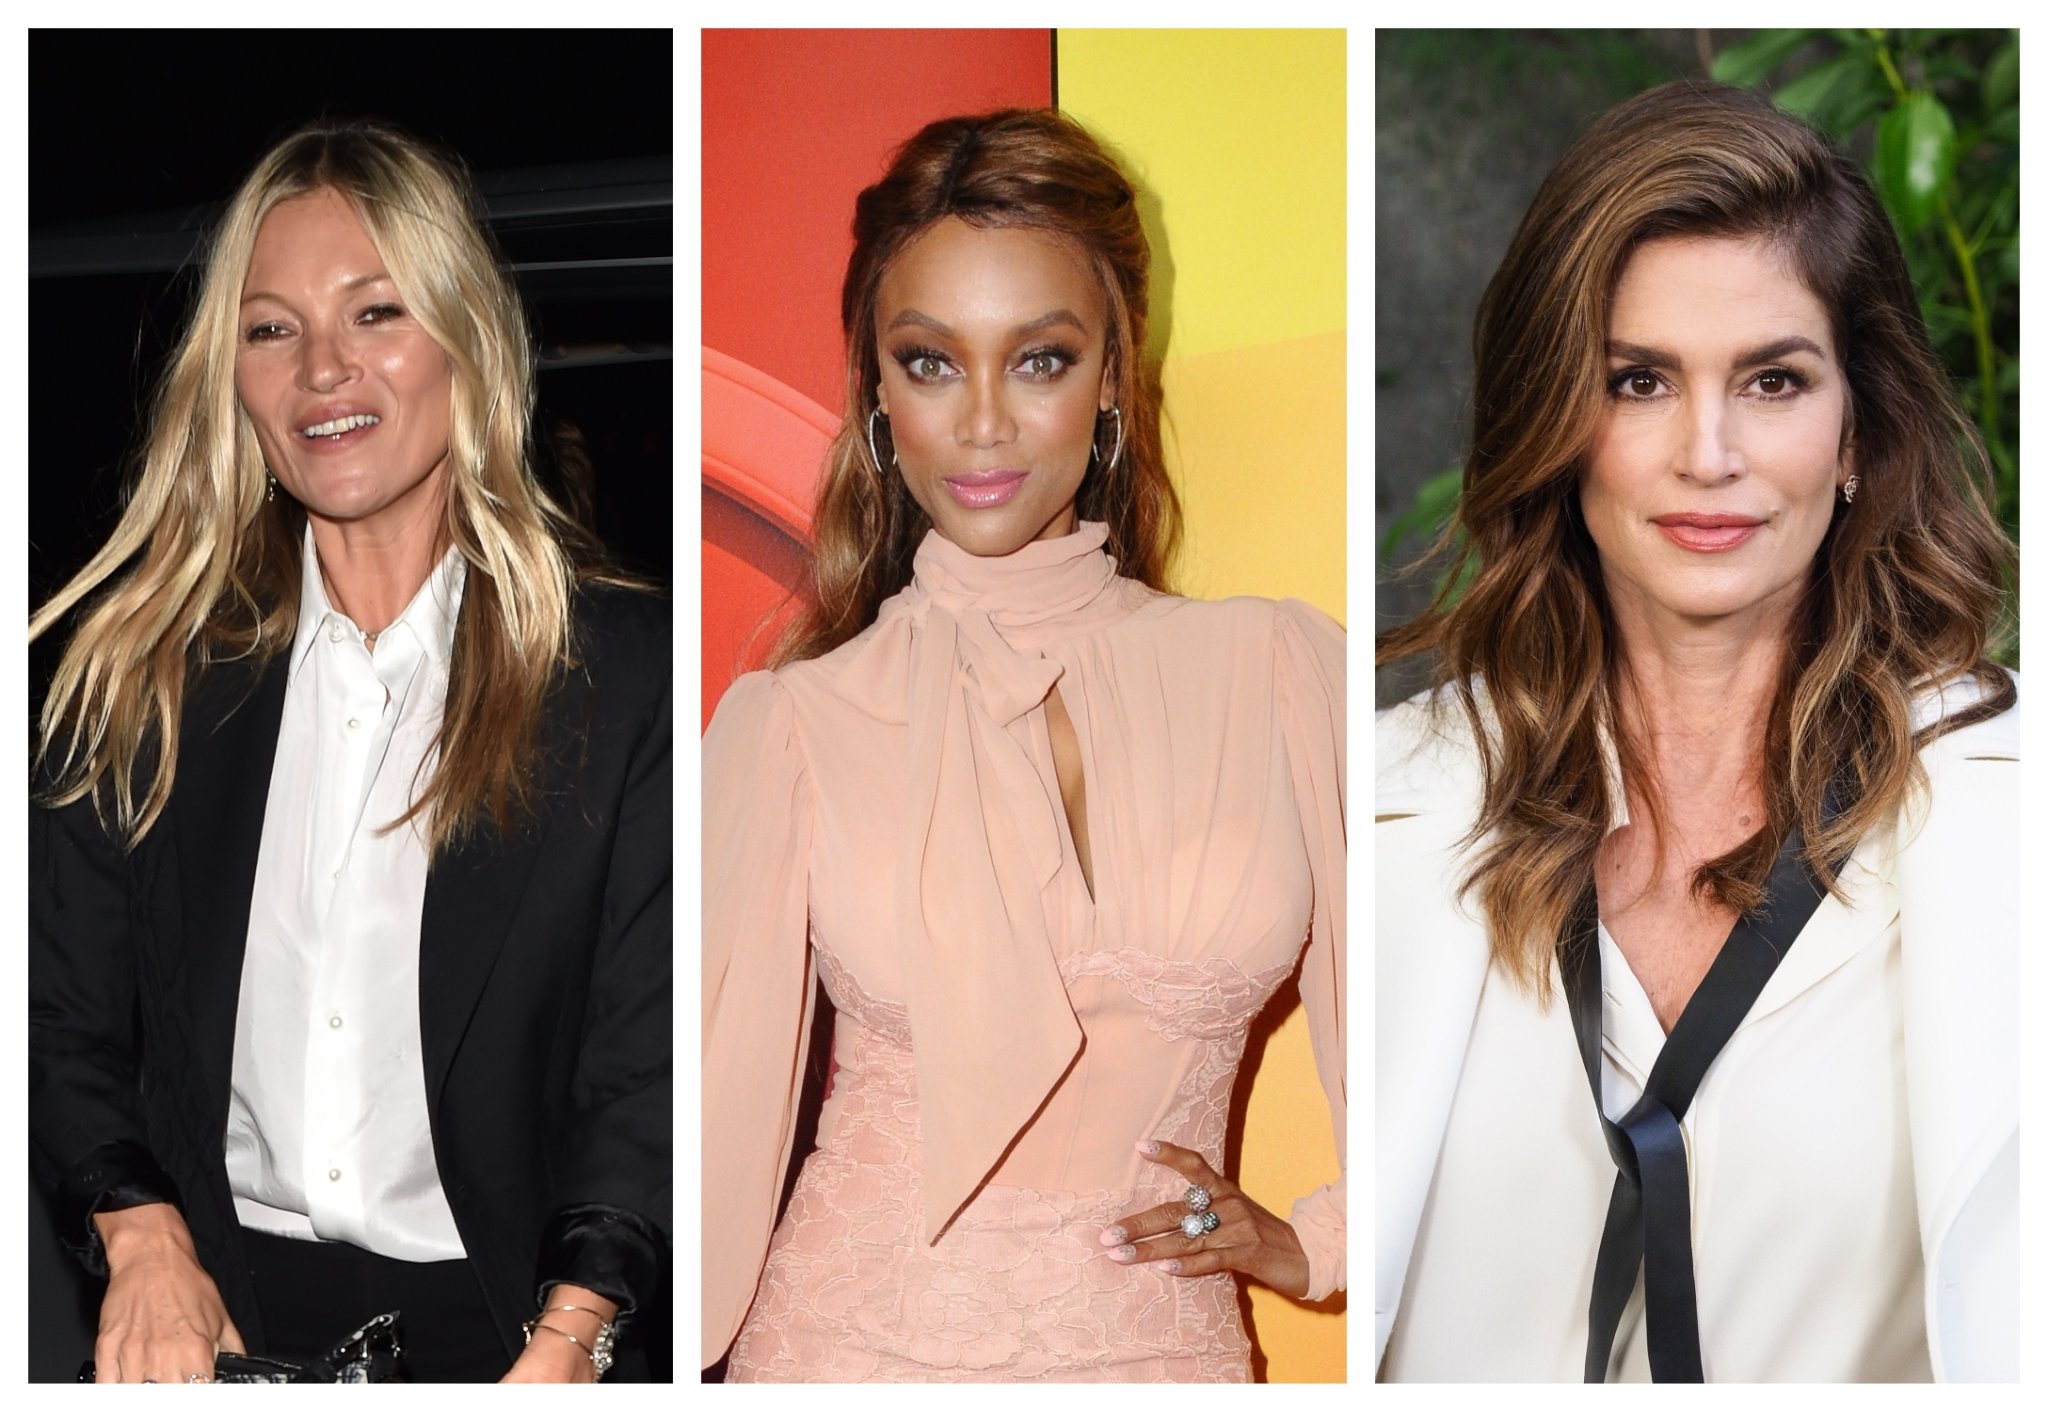 See What the Hottest '90s Supermodels Look Like Now